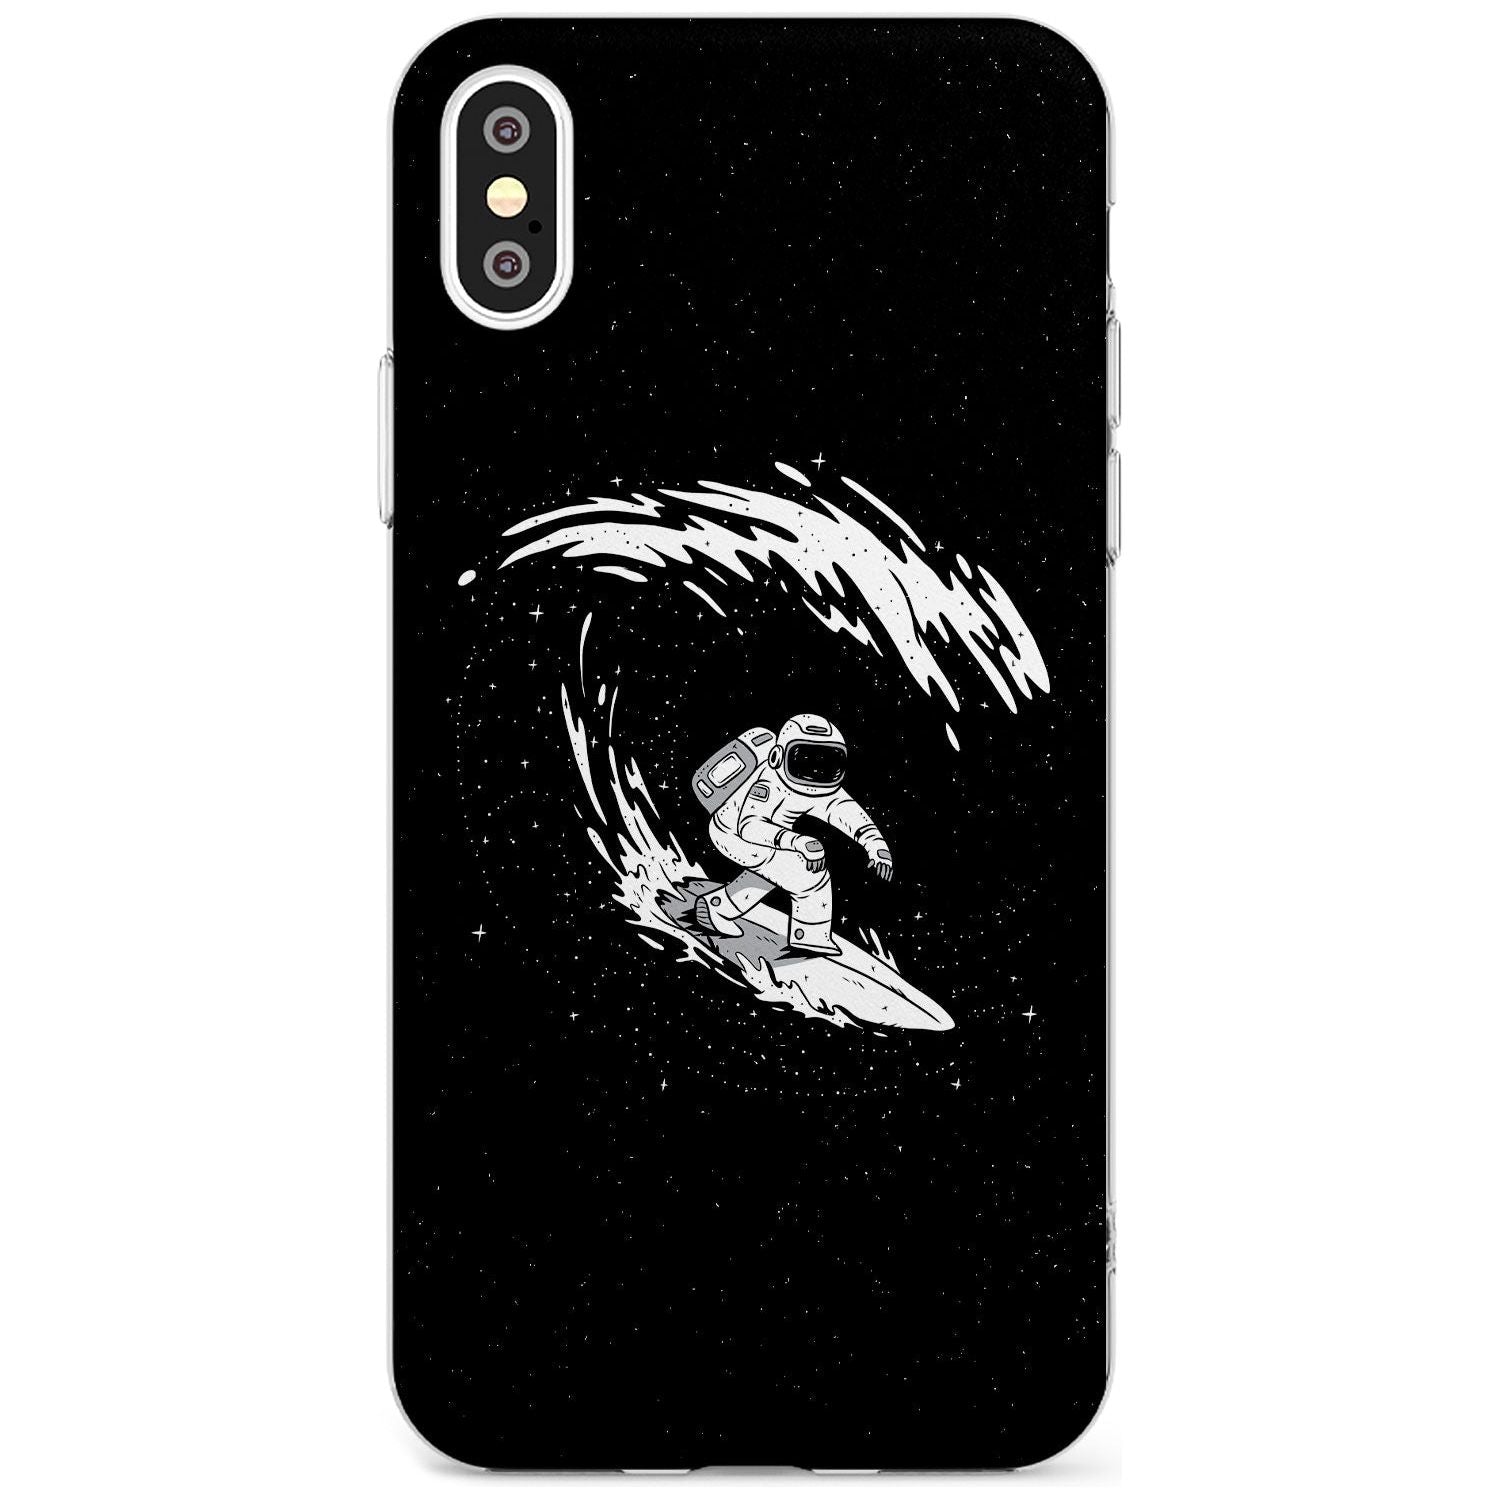 Surfing Astronaut Black Impact Phone Case for iPhone X XS Max XR